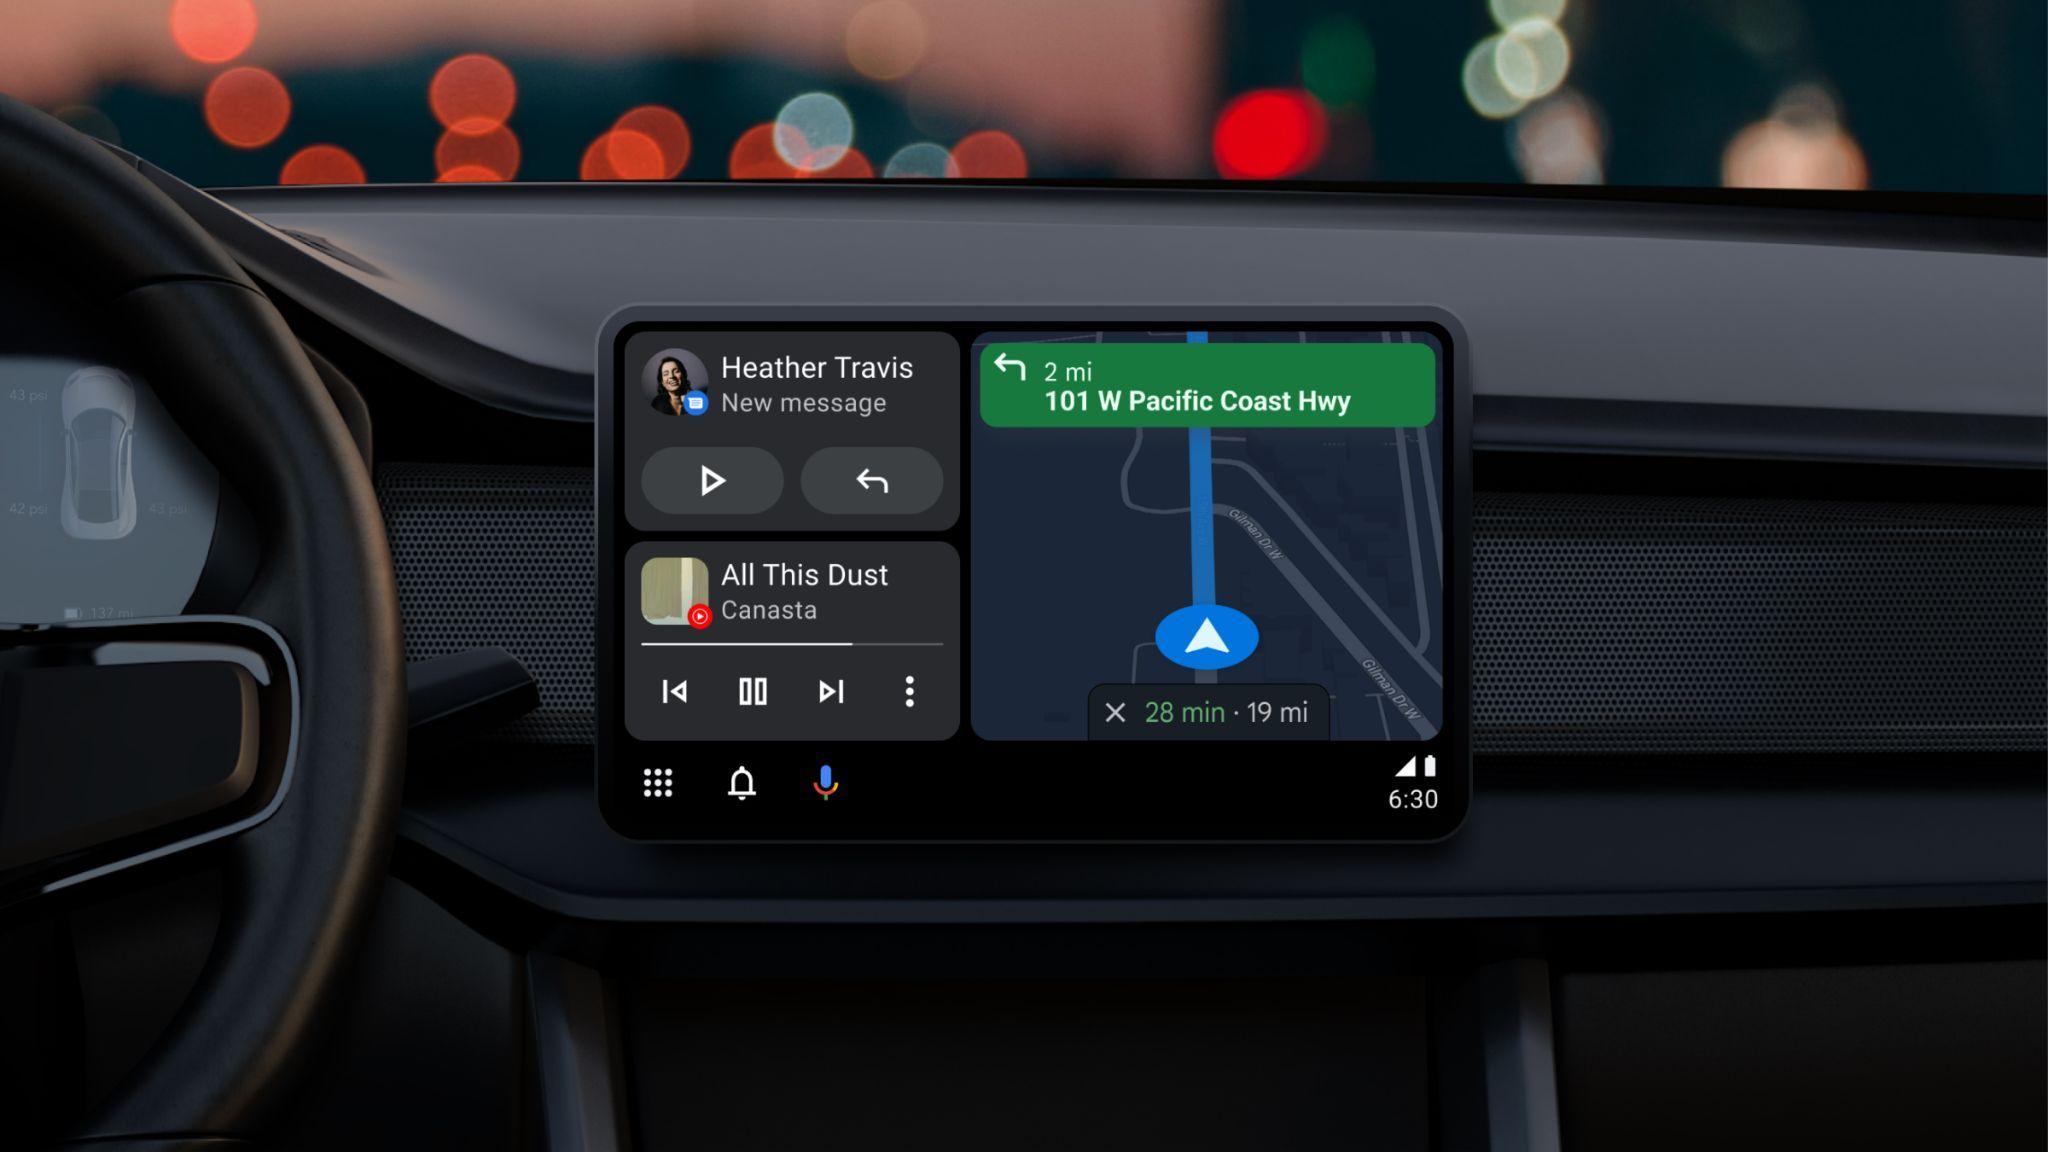 Vehicle dash with updated Android Auto UI in focus